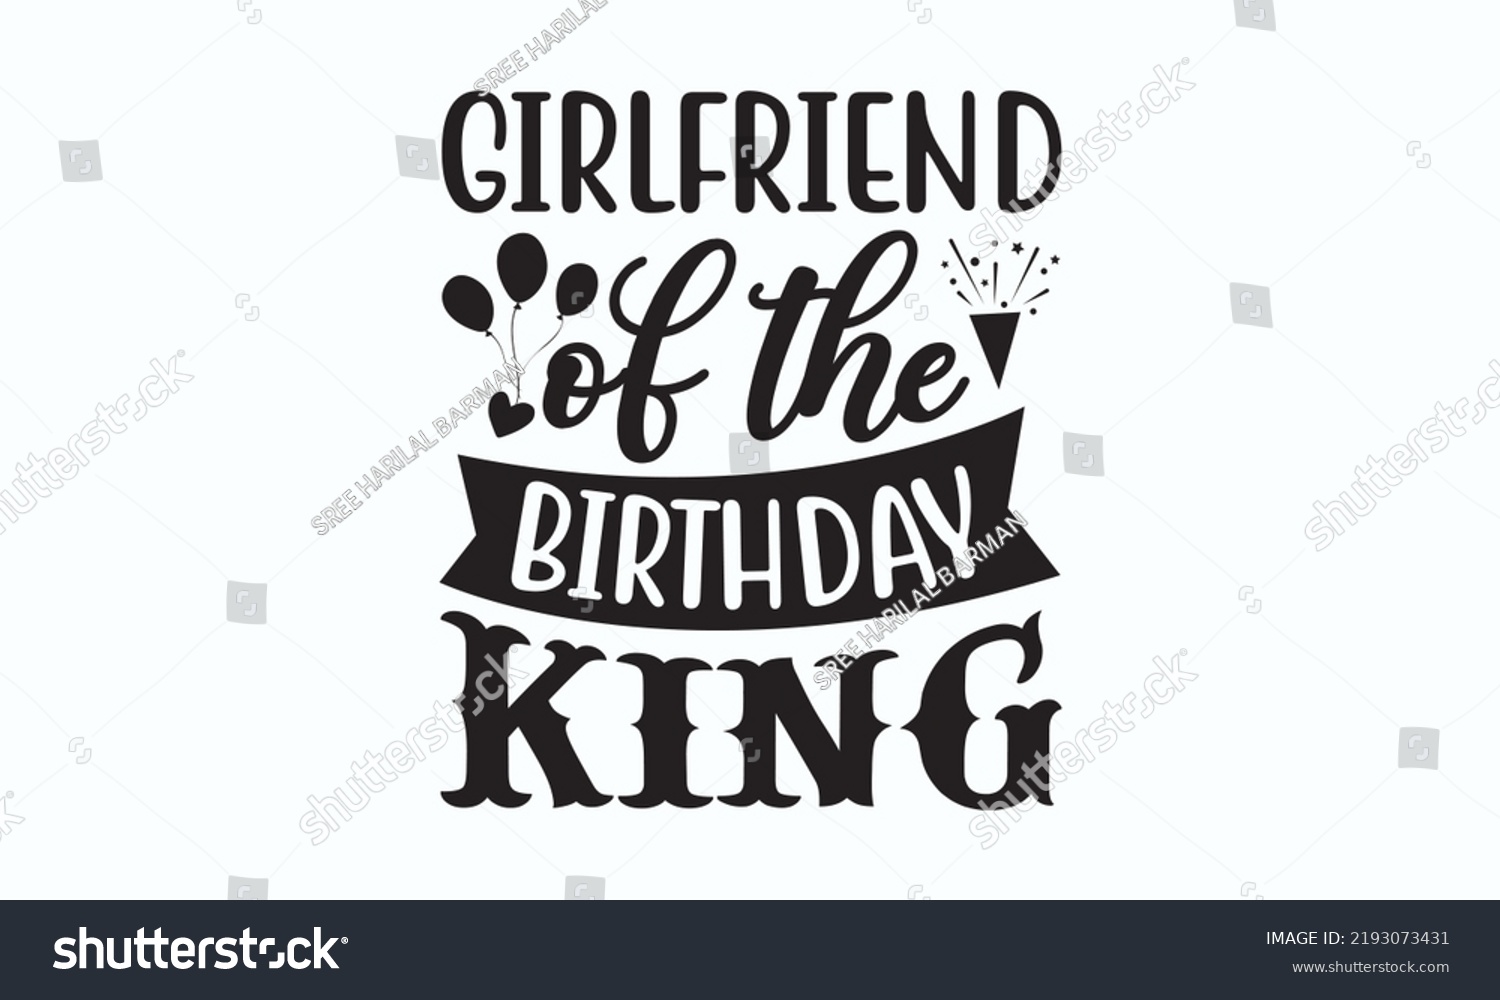 SVG of Girlfriend of the birthday king - Birthday SVG Digest typographic vector design for greeting cards, Birthday cards, Good for scrapbooking, posters, templet, textiles, gifts, and wedding sets. Eps 10. svg